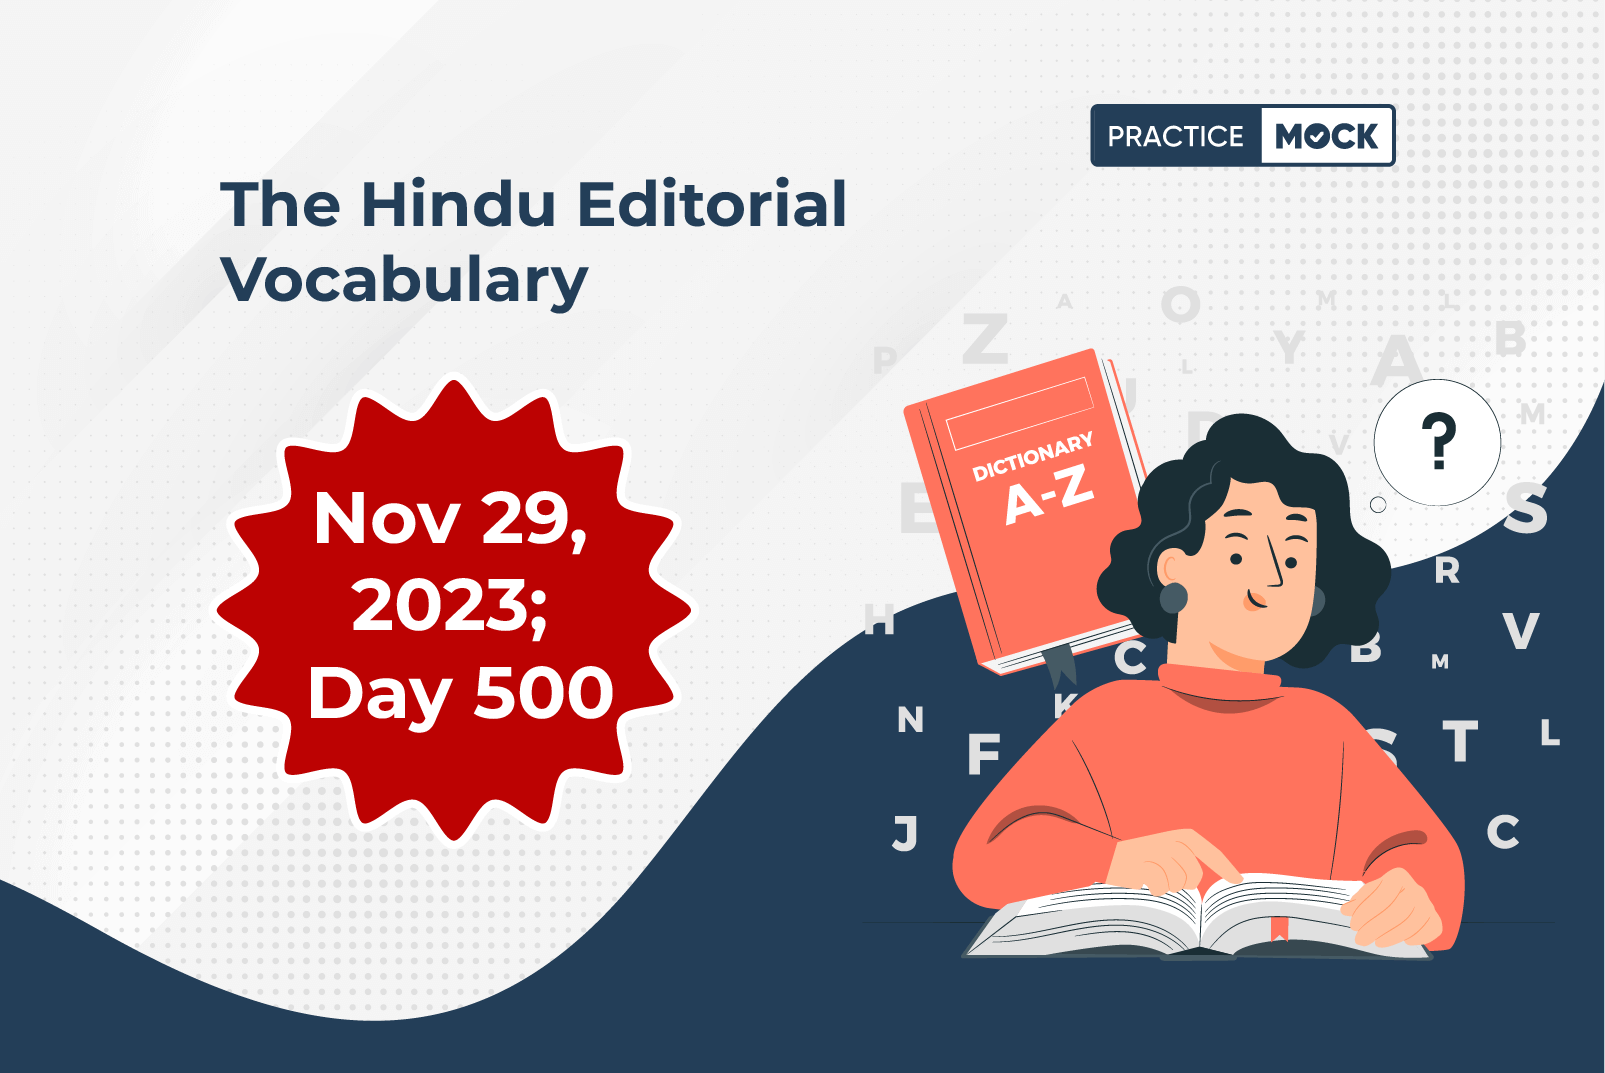 Daily Vocabulary from 'The Hindu': July 16, 2023